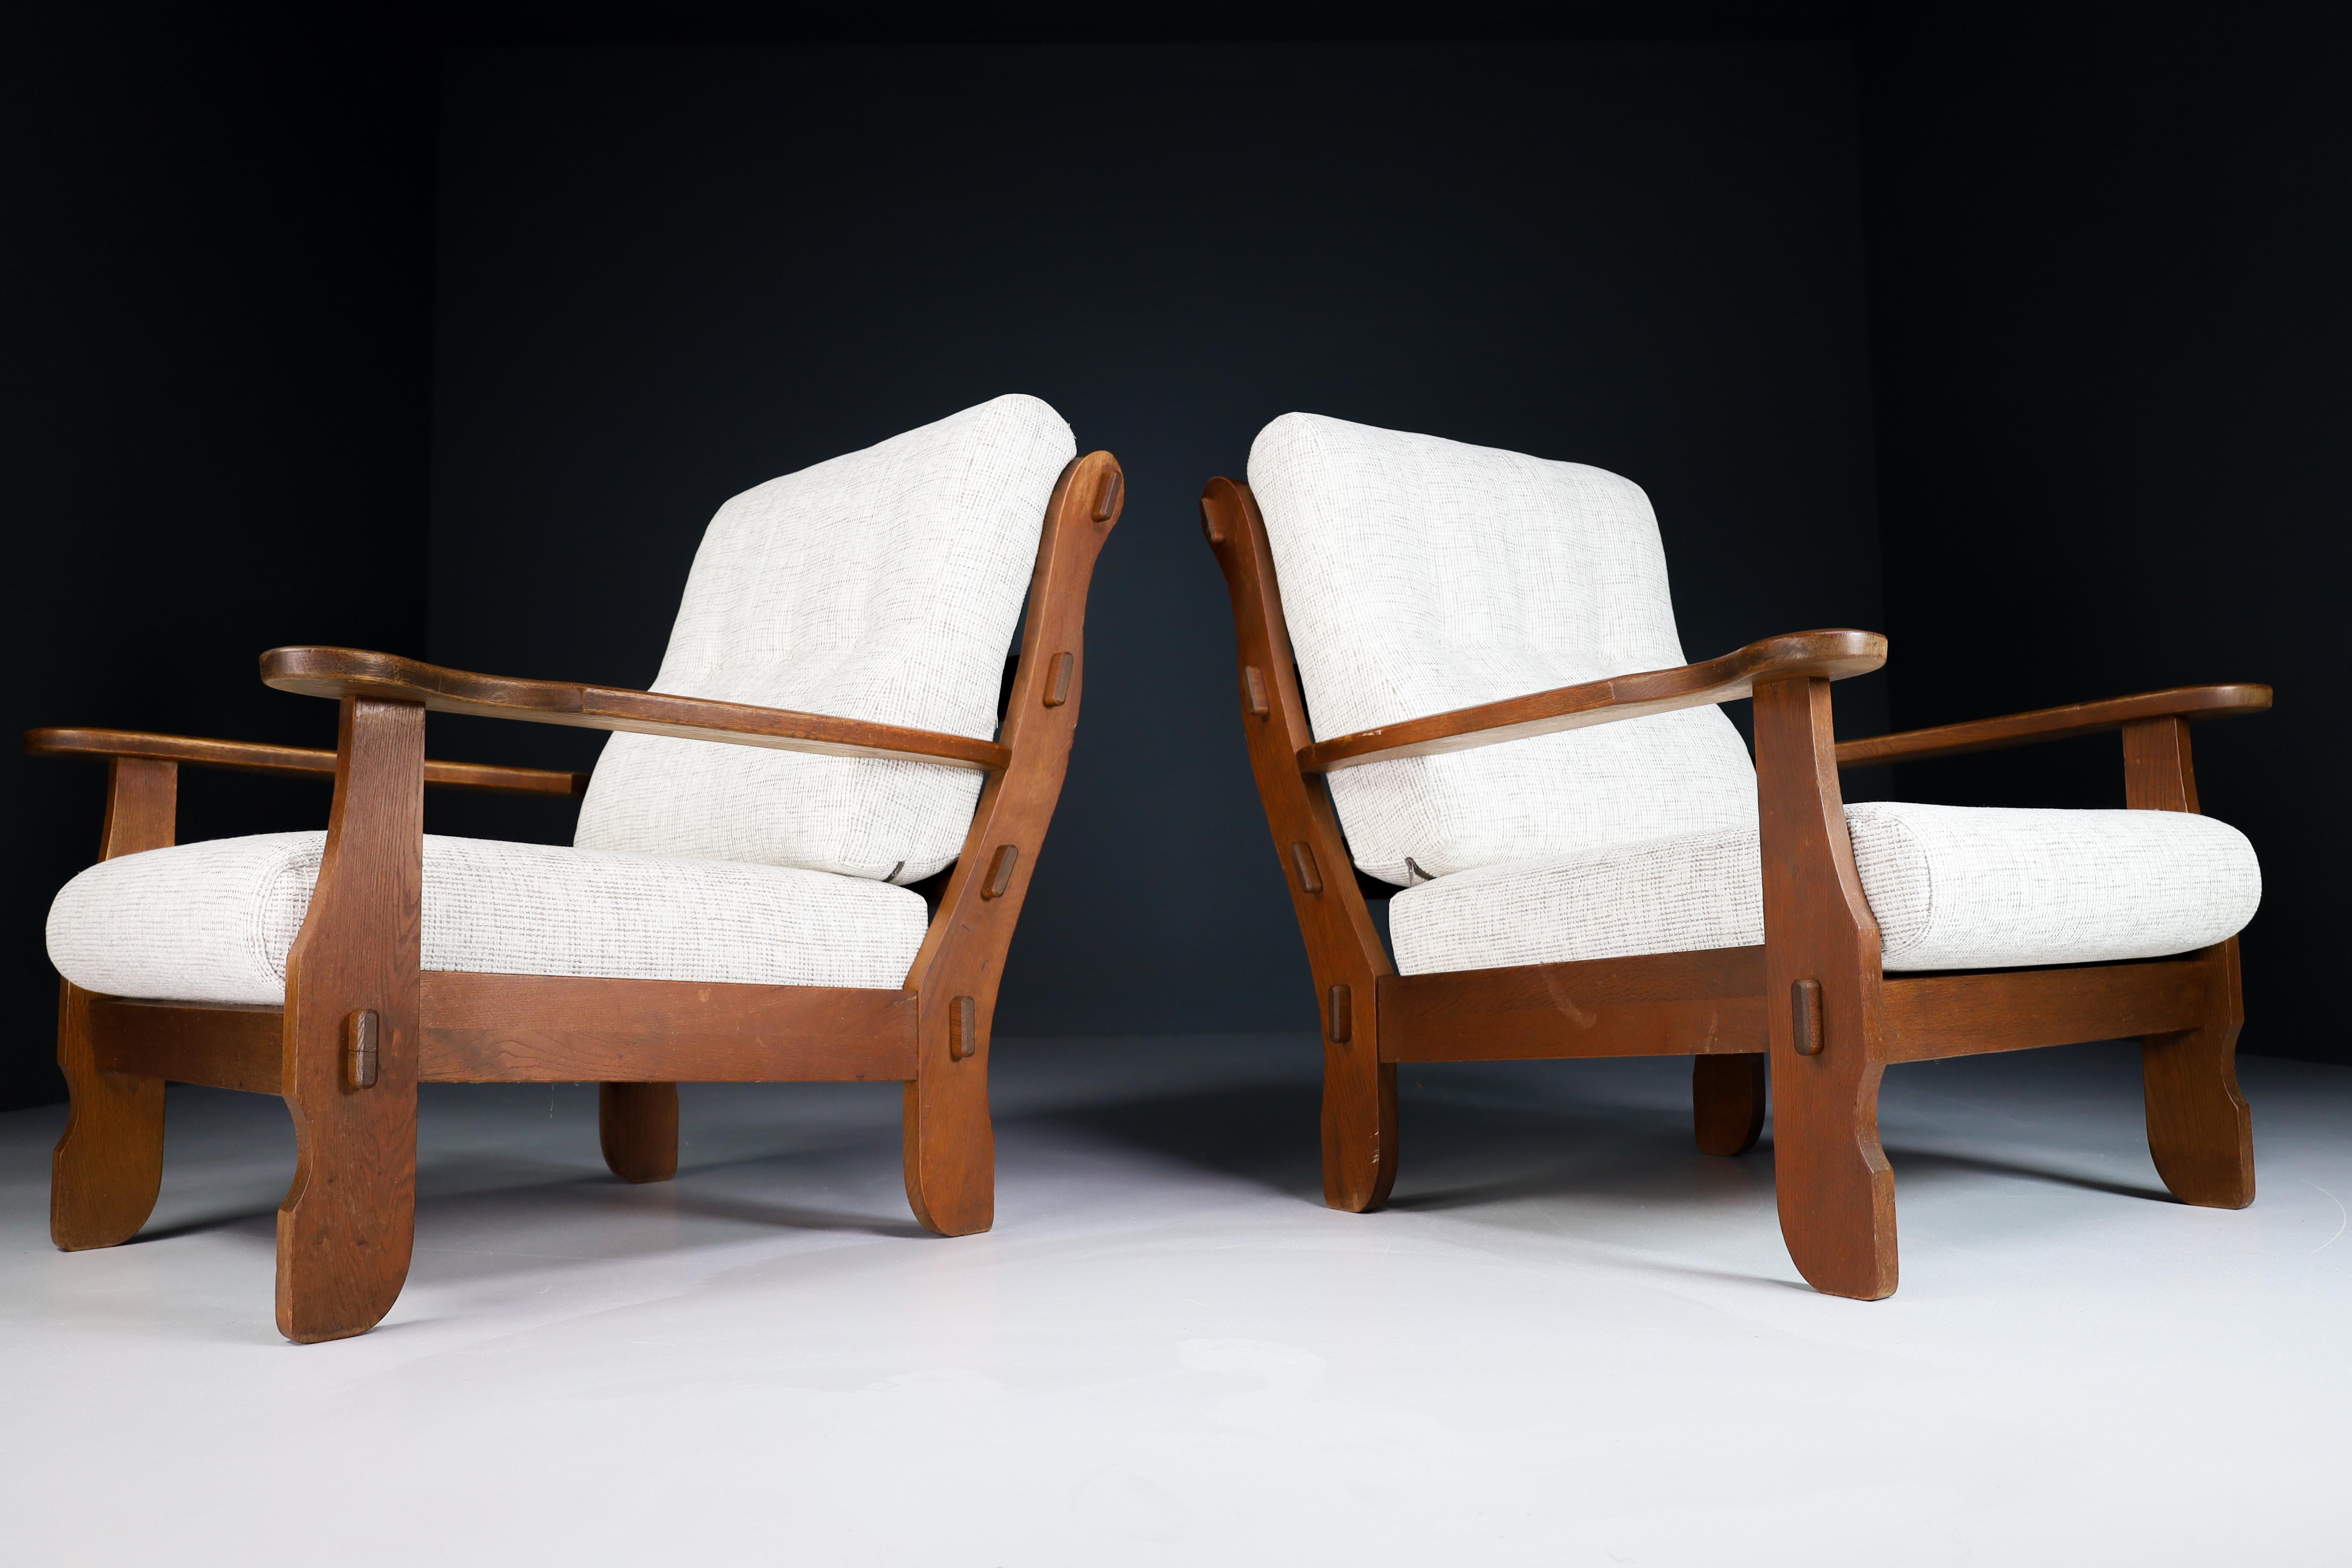 Sculptural Armchairs in Oak and Fabric, France 1960s

Pair of two original midcentury sculptural armchairs or lounge chairs manufactured and designed in France 1960s. Made of solid oak and professionally reupholstered in new fabric. These